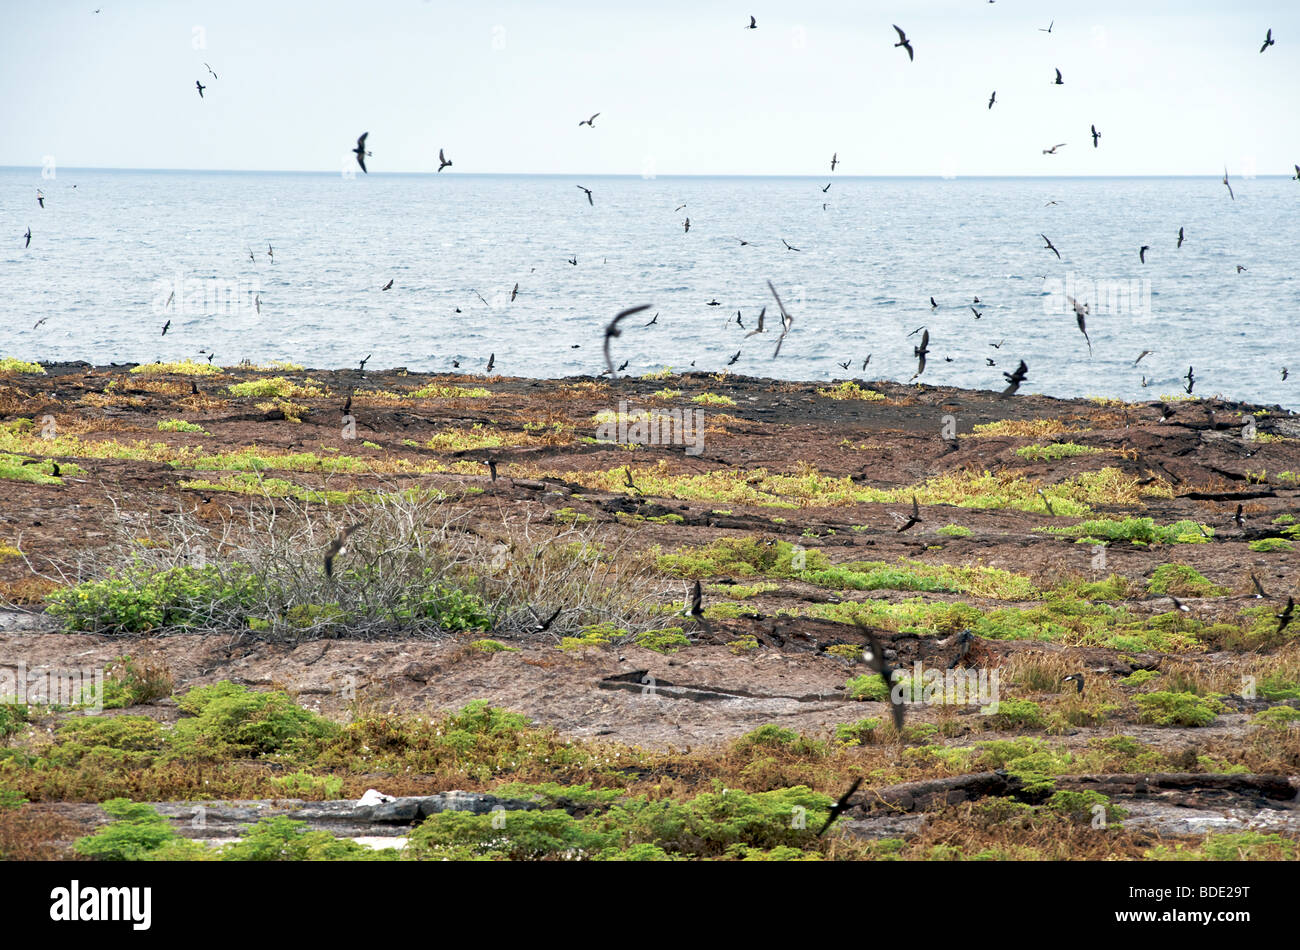 Elliot's Storm Petrels flying above and approaching nest burrows, Genovesa Island, Galapagos Islands, Ecuador, South America. Stock Photo